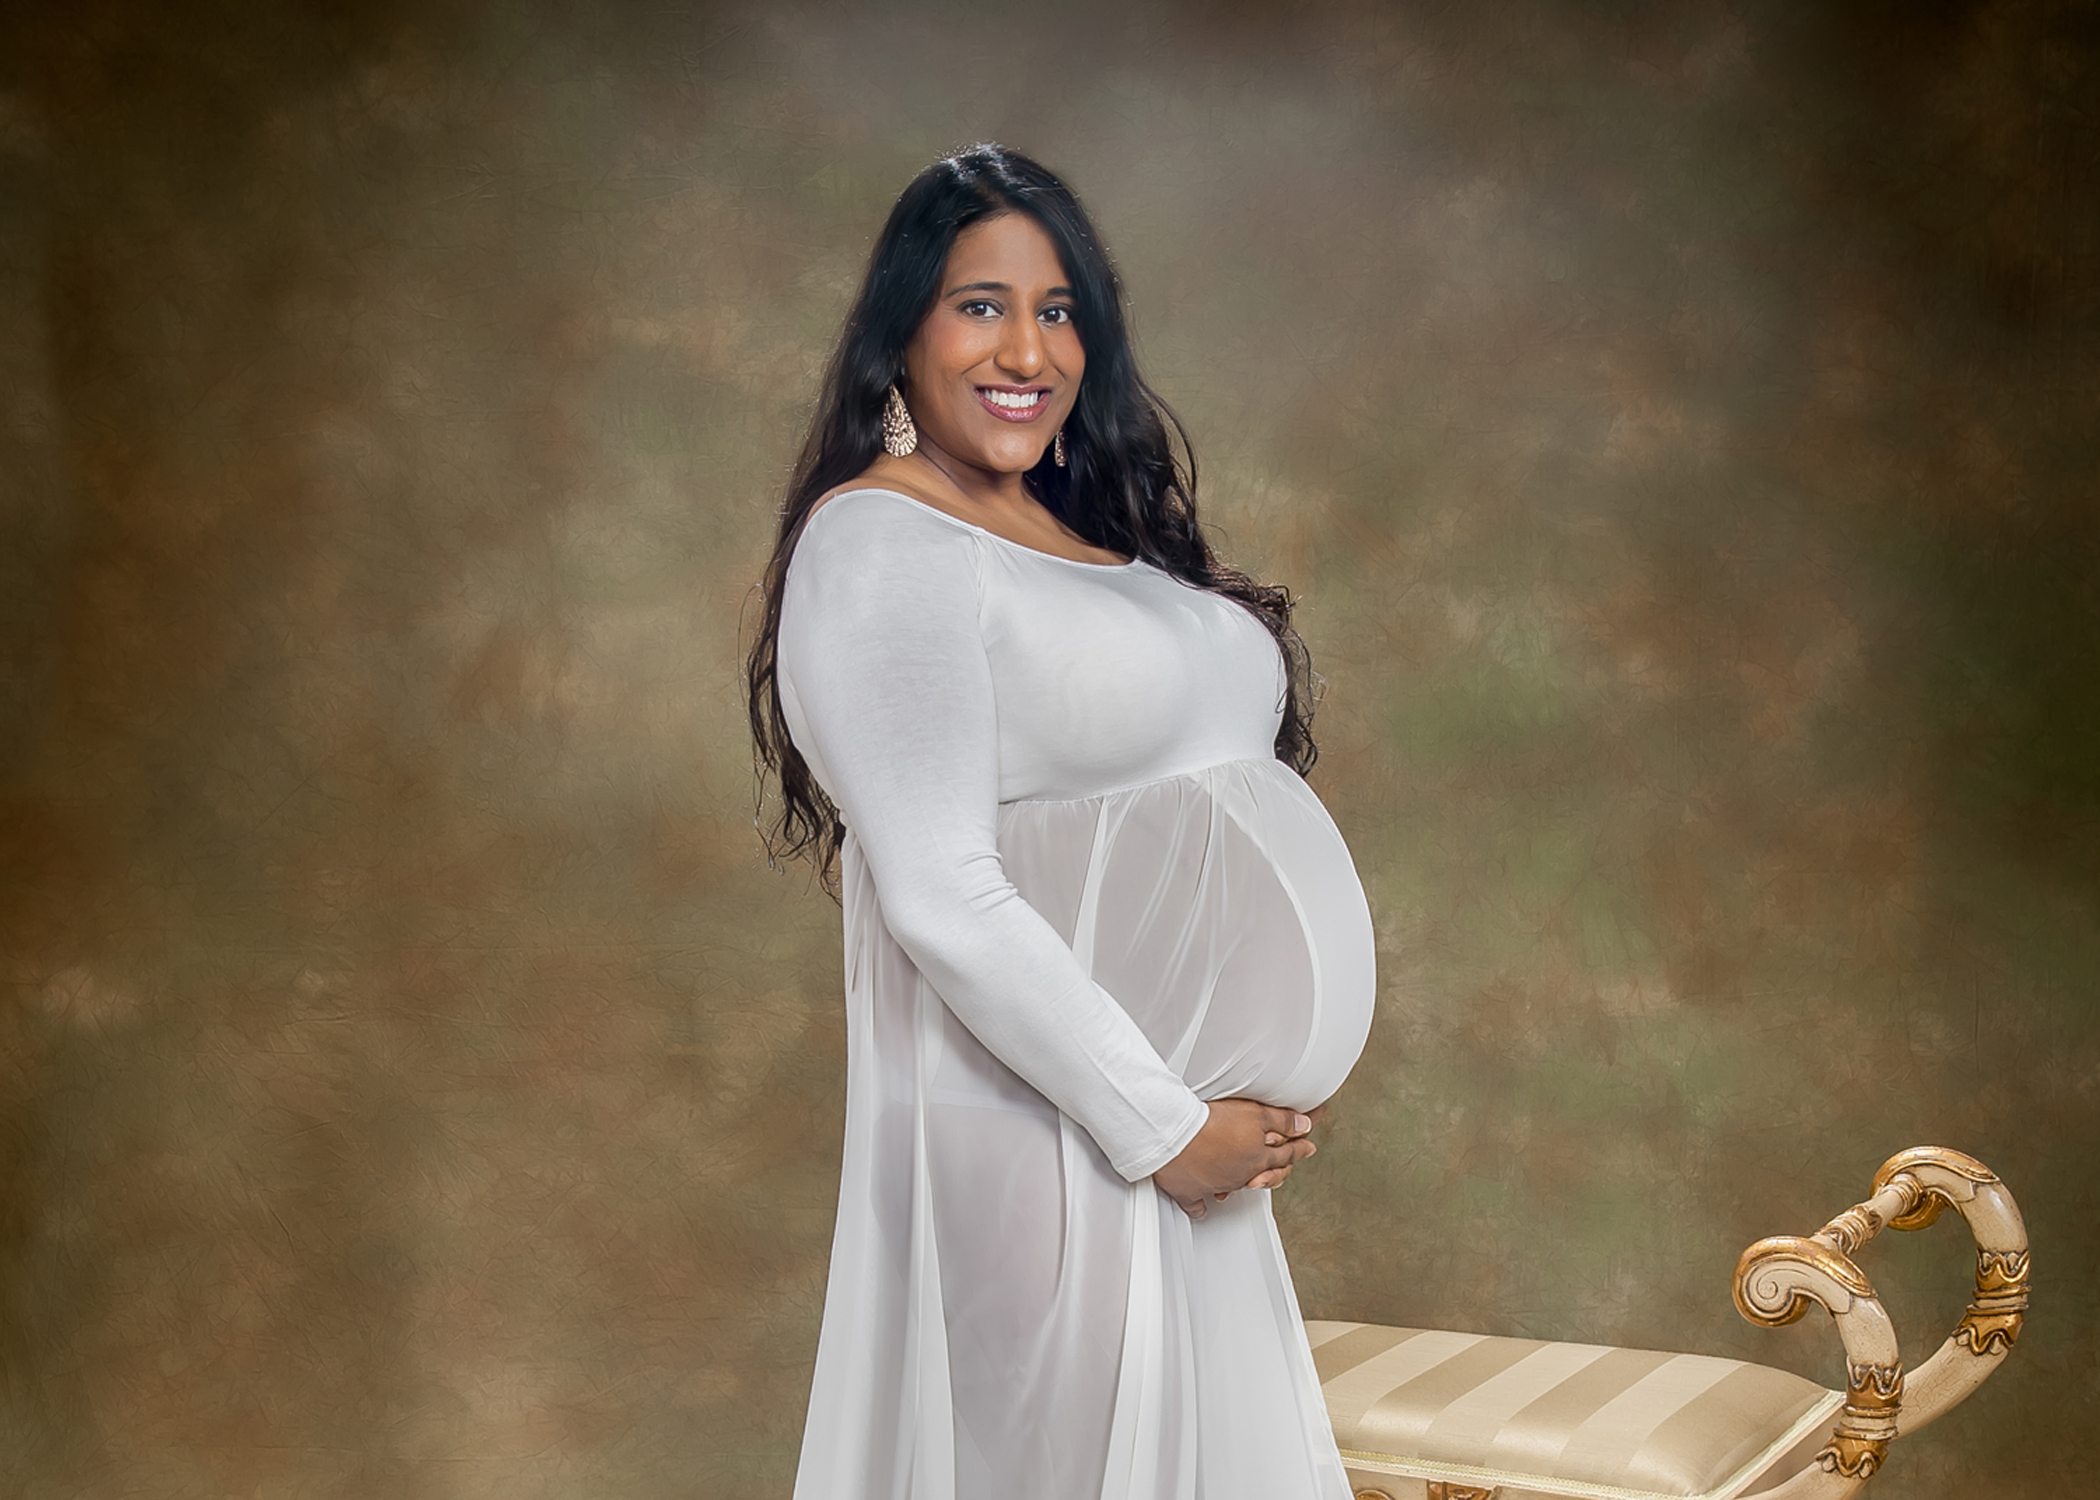 Maternity Photo Session in Voorhees, New Jersey at Mary Quinn Photography Inc.